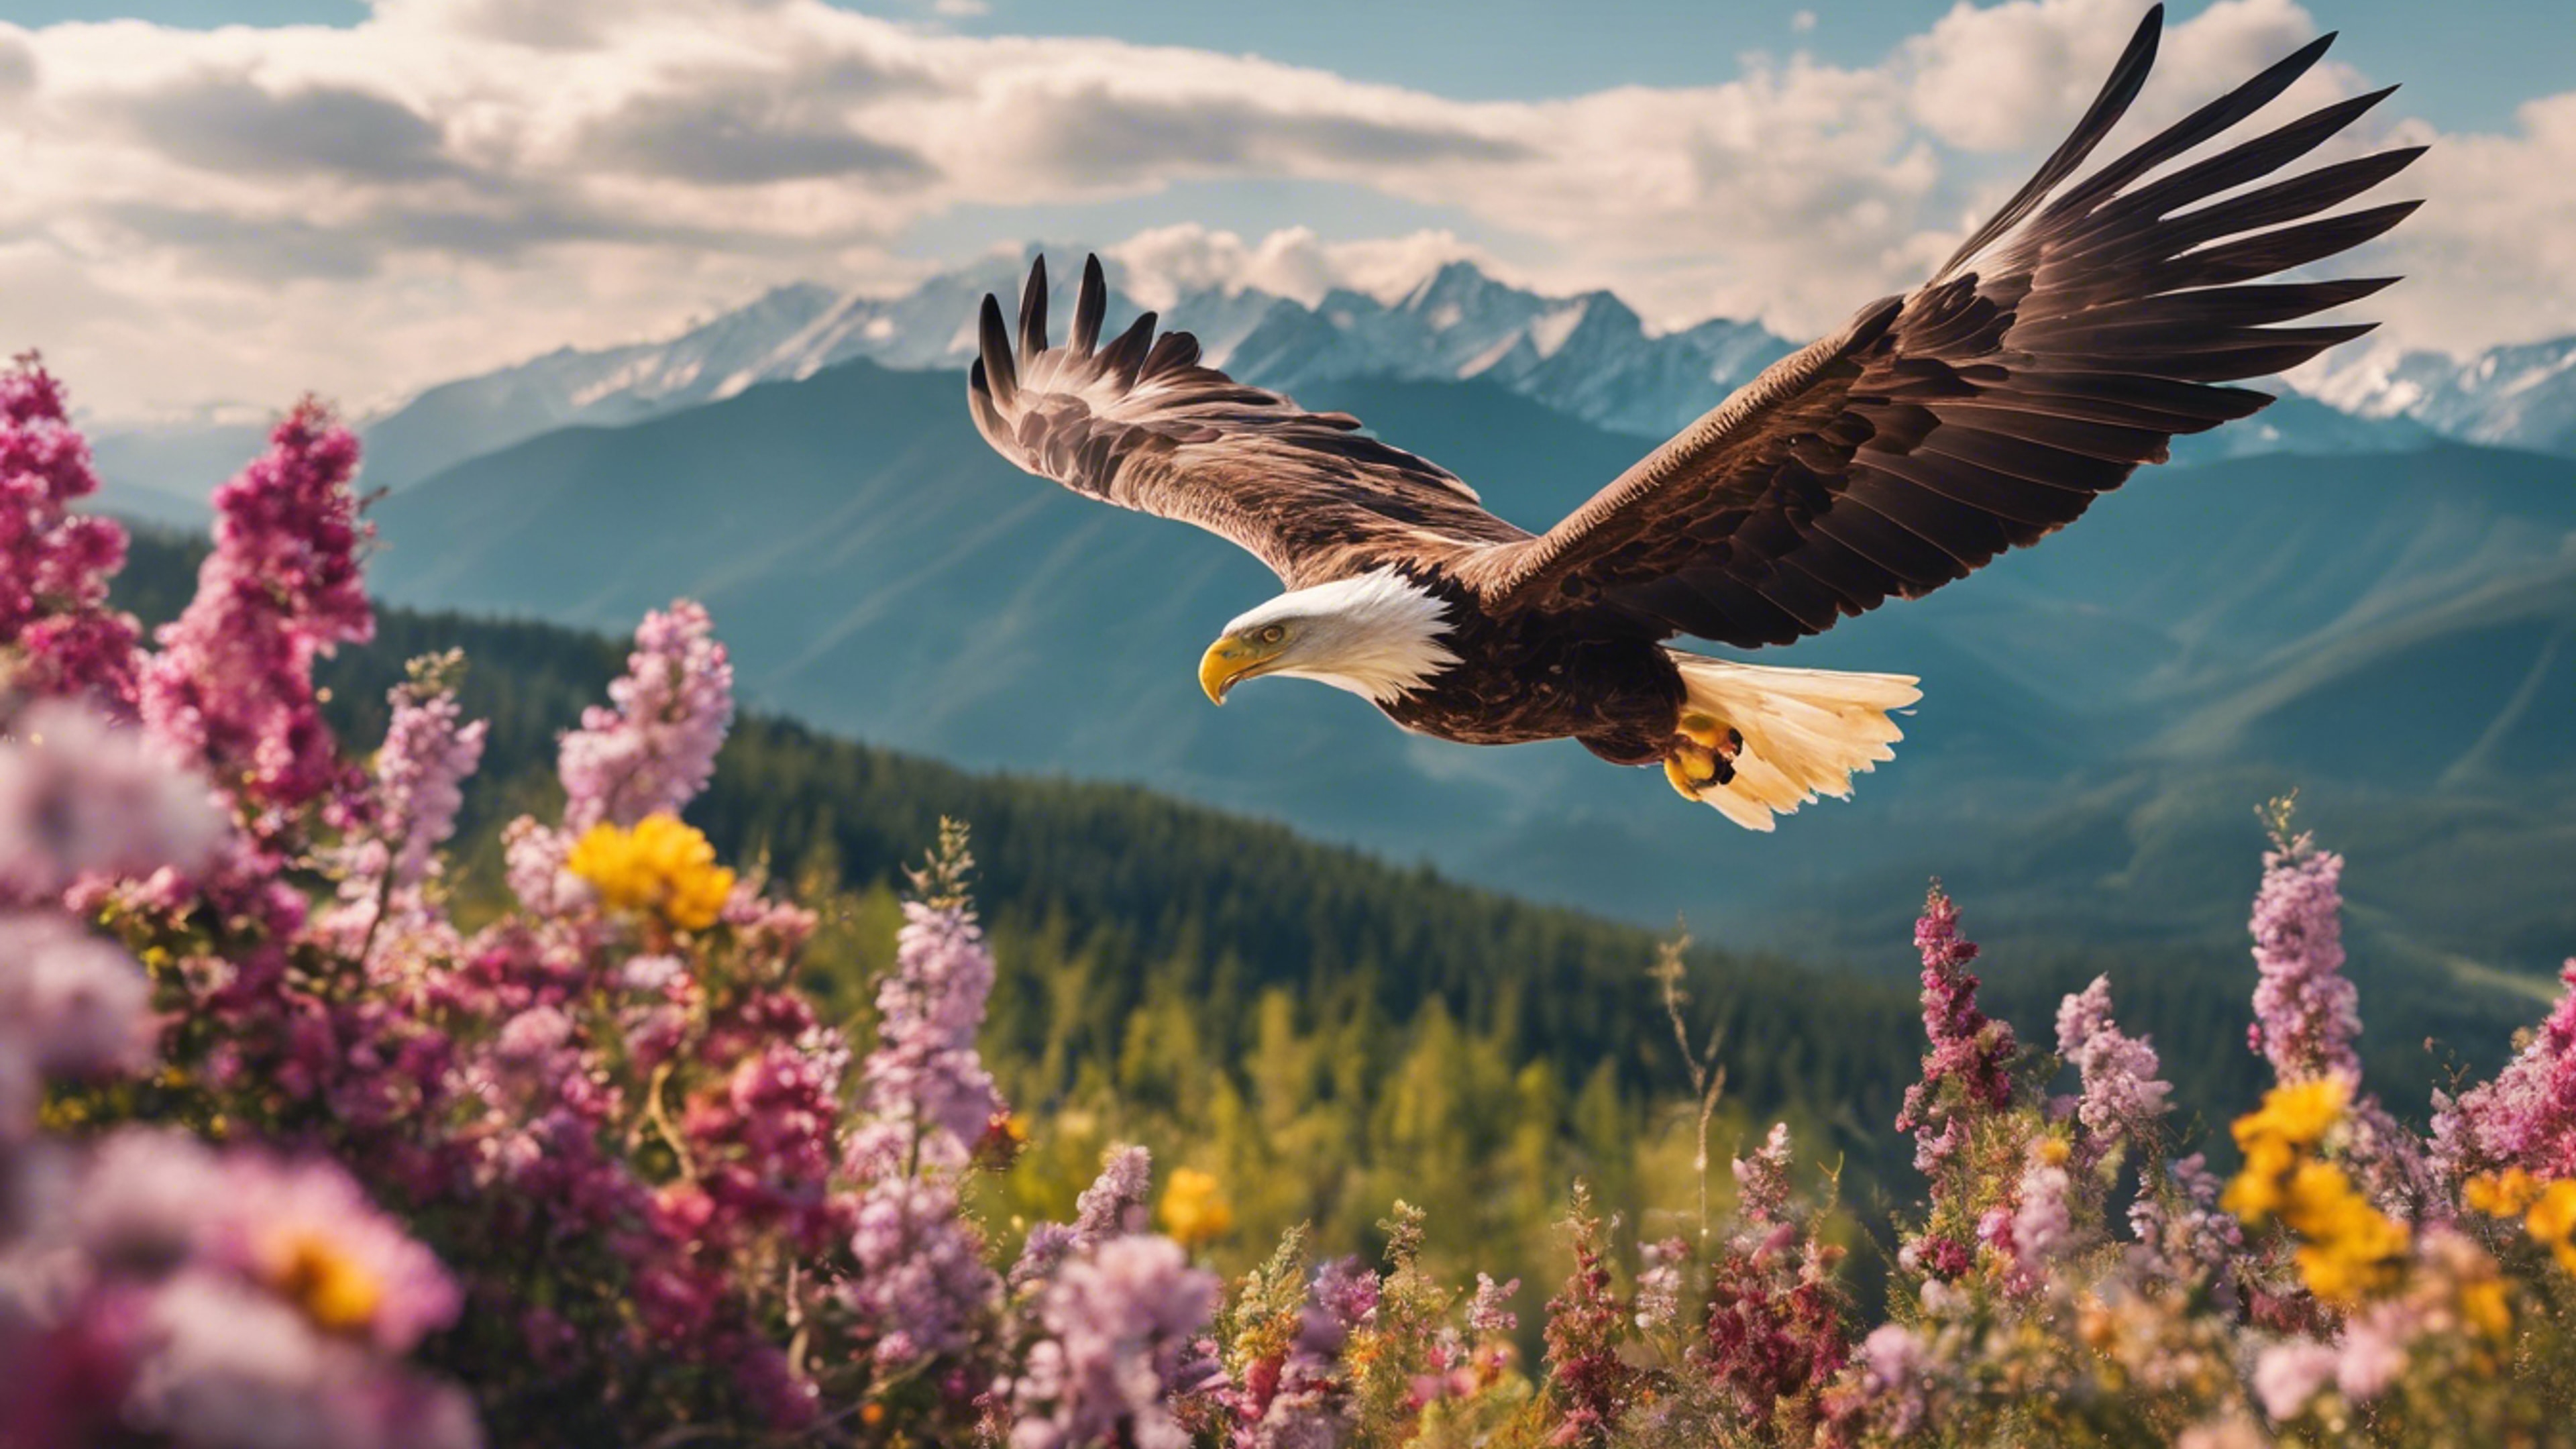 An eagle soaring over a mountain range that's exploding with color from various spring flowers and blooming trees.壁紙[ebc47f2901984a48bedd]